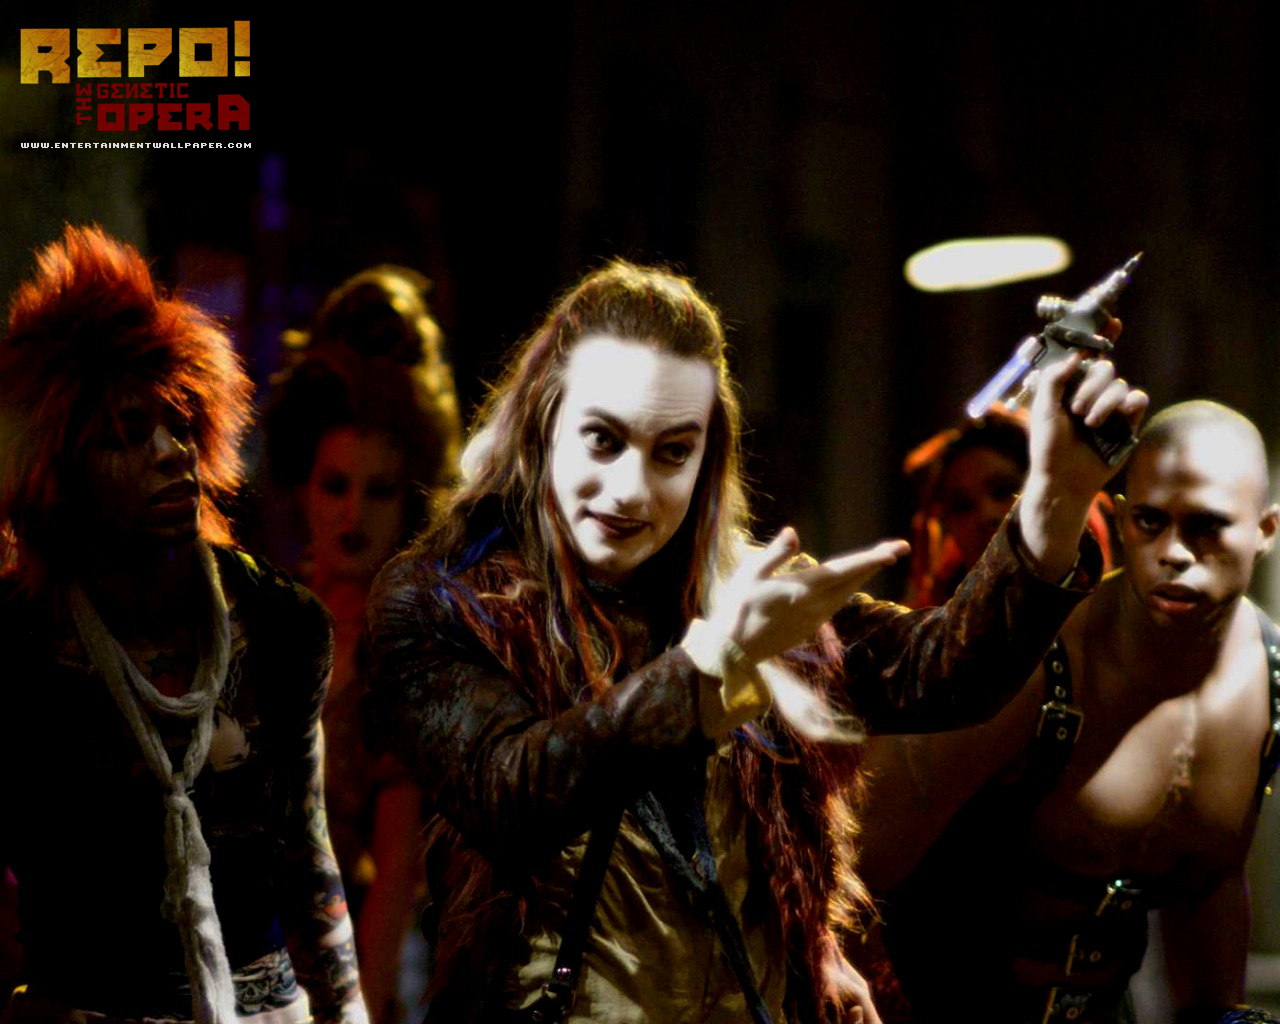 Repo! The Genetic Opera Backgrounds, Compatible - PC, Mobile, Gadgets| 1280x1024 px